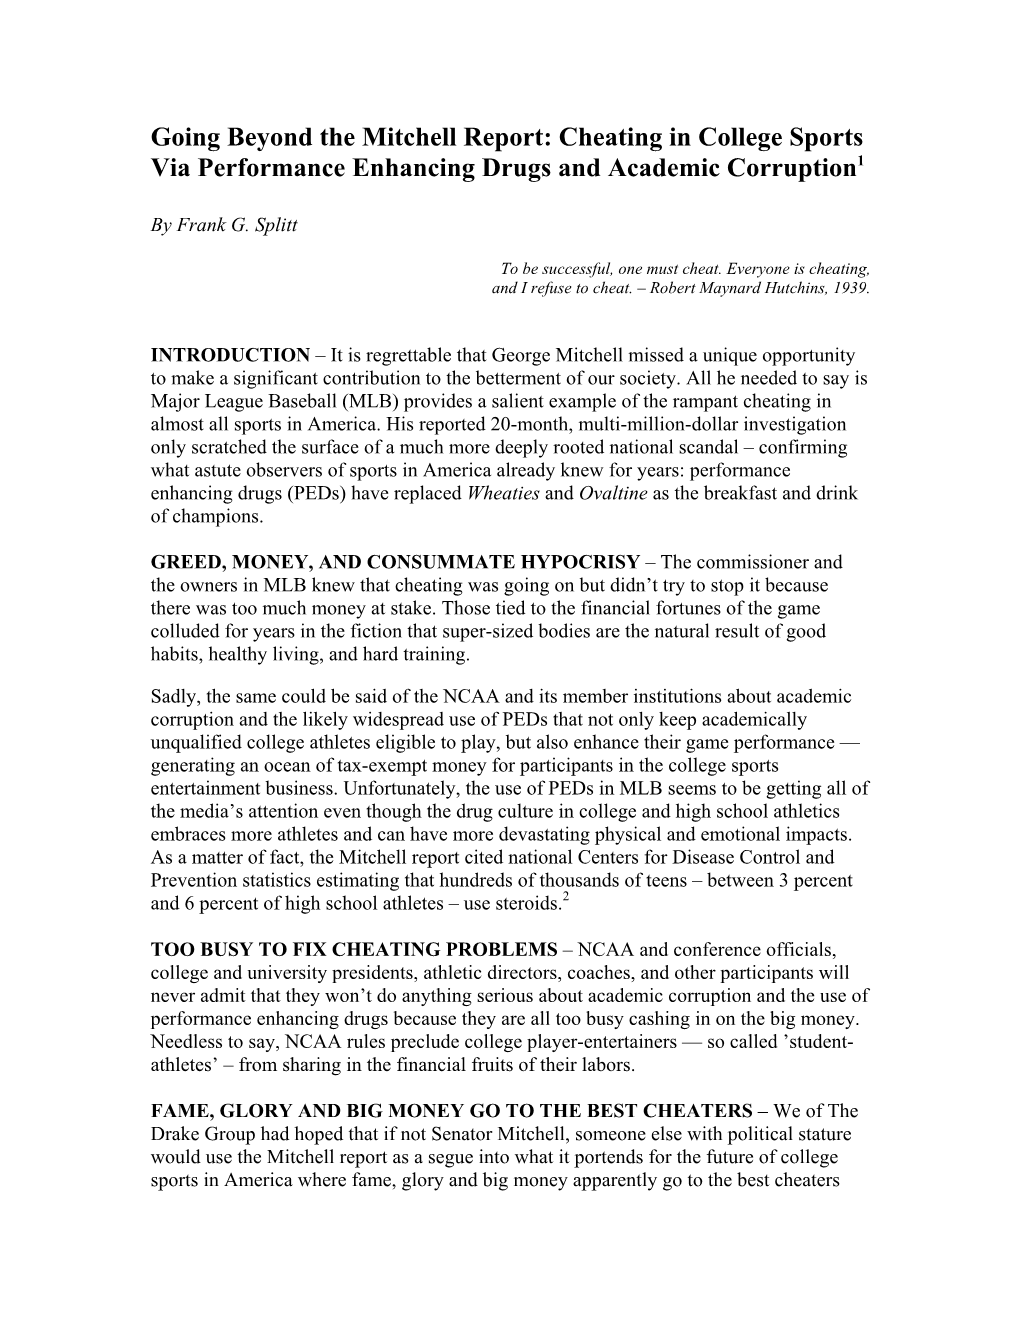 Going Beyond the Mitchell Report: Cheating in College Sports Via Performance Enhancing Drugs and Academic Corruption1